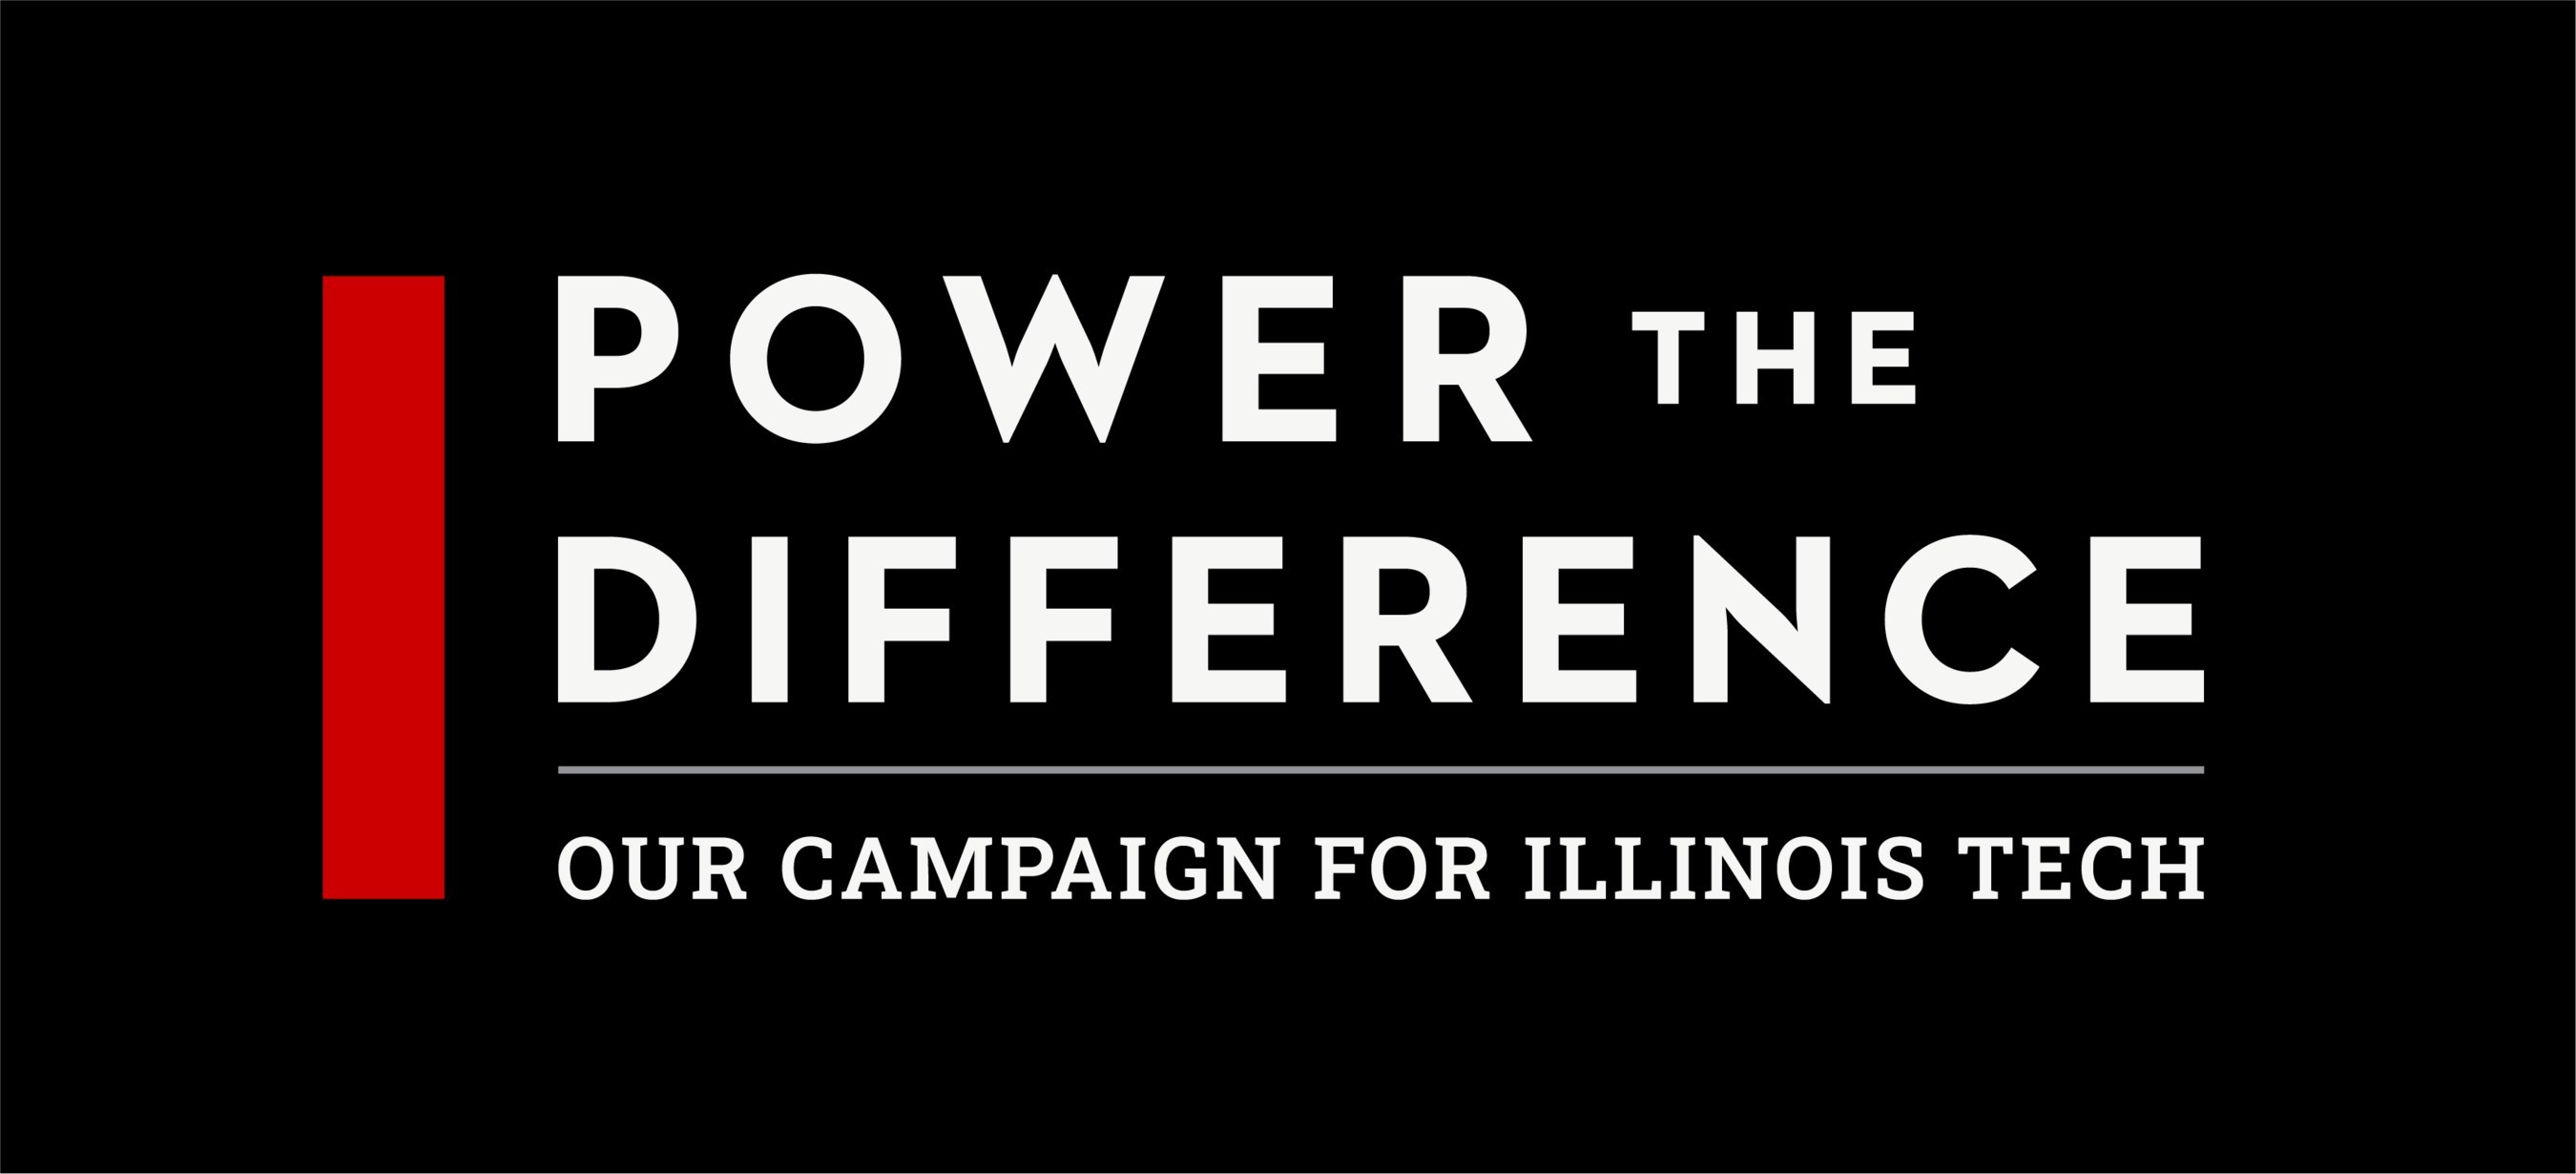 Illinois Institute of Technology (Illinois Tech) announced a $1 billion Power the Difference campaign to help the university grow its student body; invest in faculty, facilities, and educational programs; develop and deliver new world-leading research programs; and serve as the premier technology-focused university in Chicago.